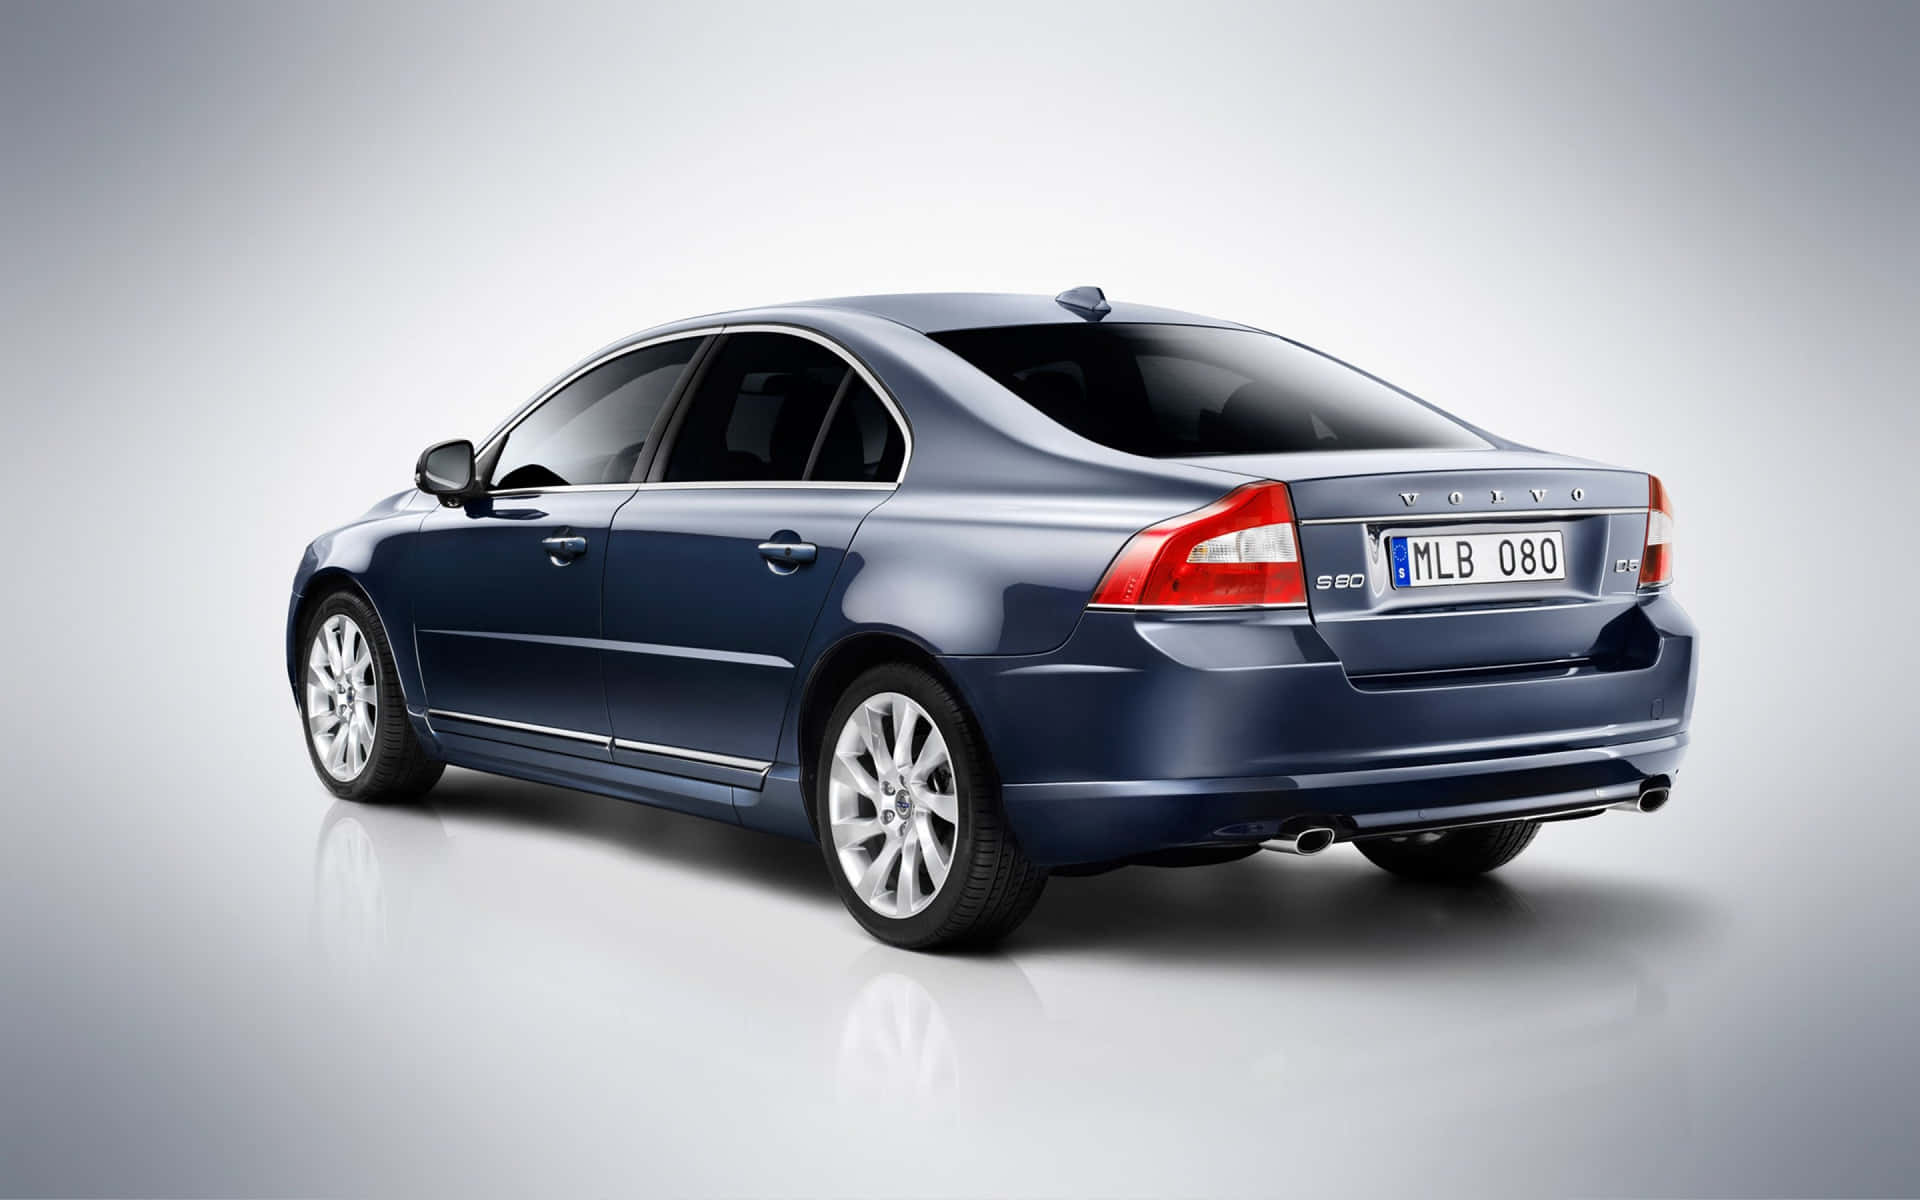 Caption: Luxurious Volvo S80 Car In Nighttime Scenery Wallpaper